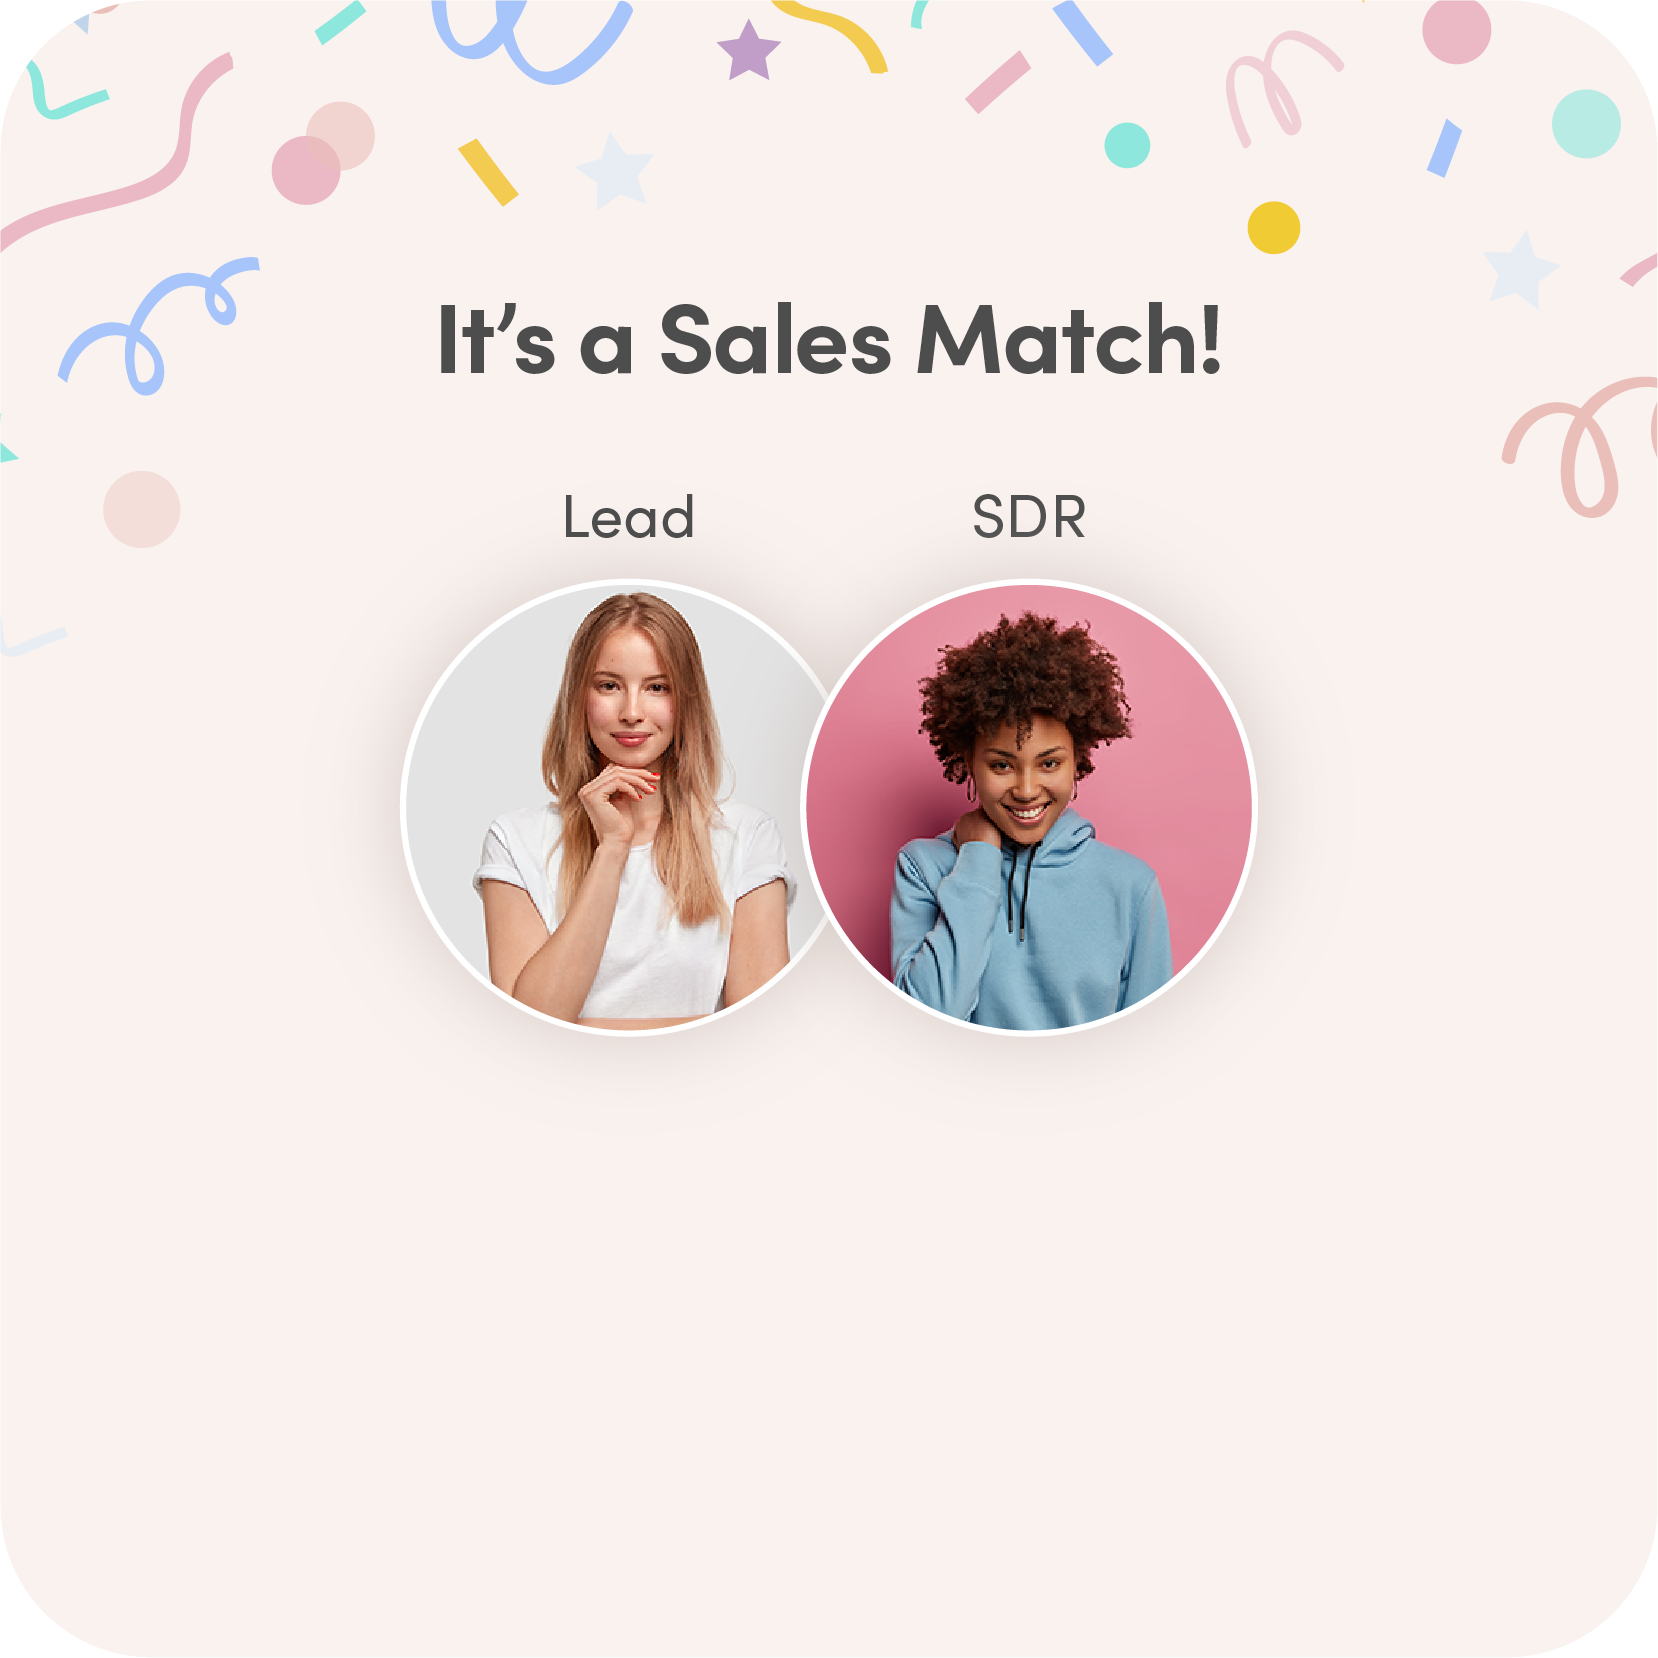 Sales triage prioritize leads - Step 3 - sales match